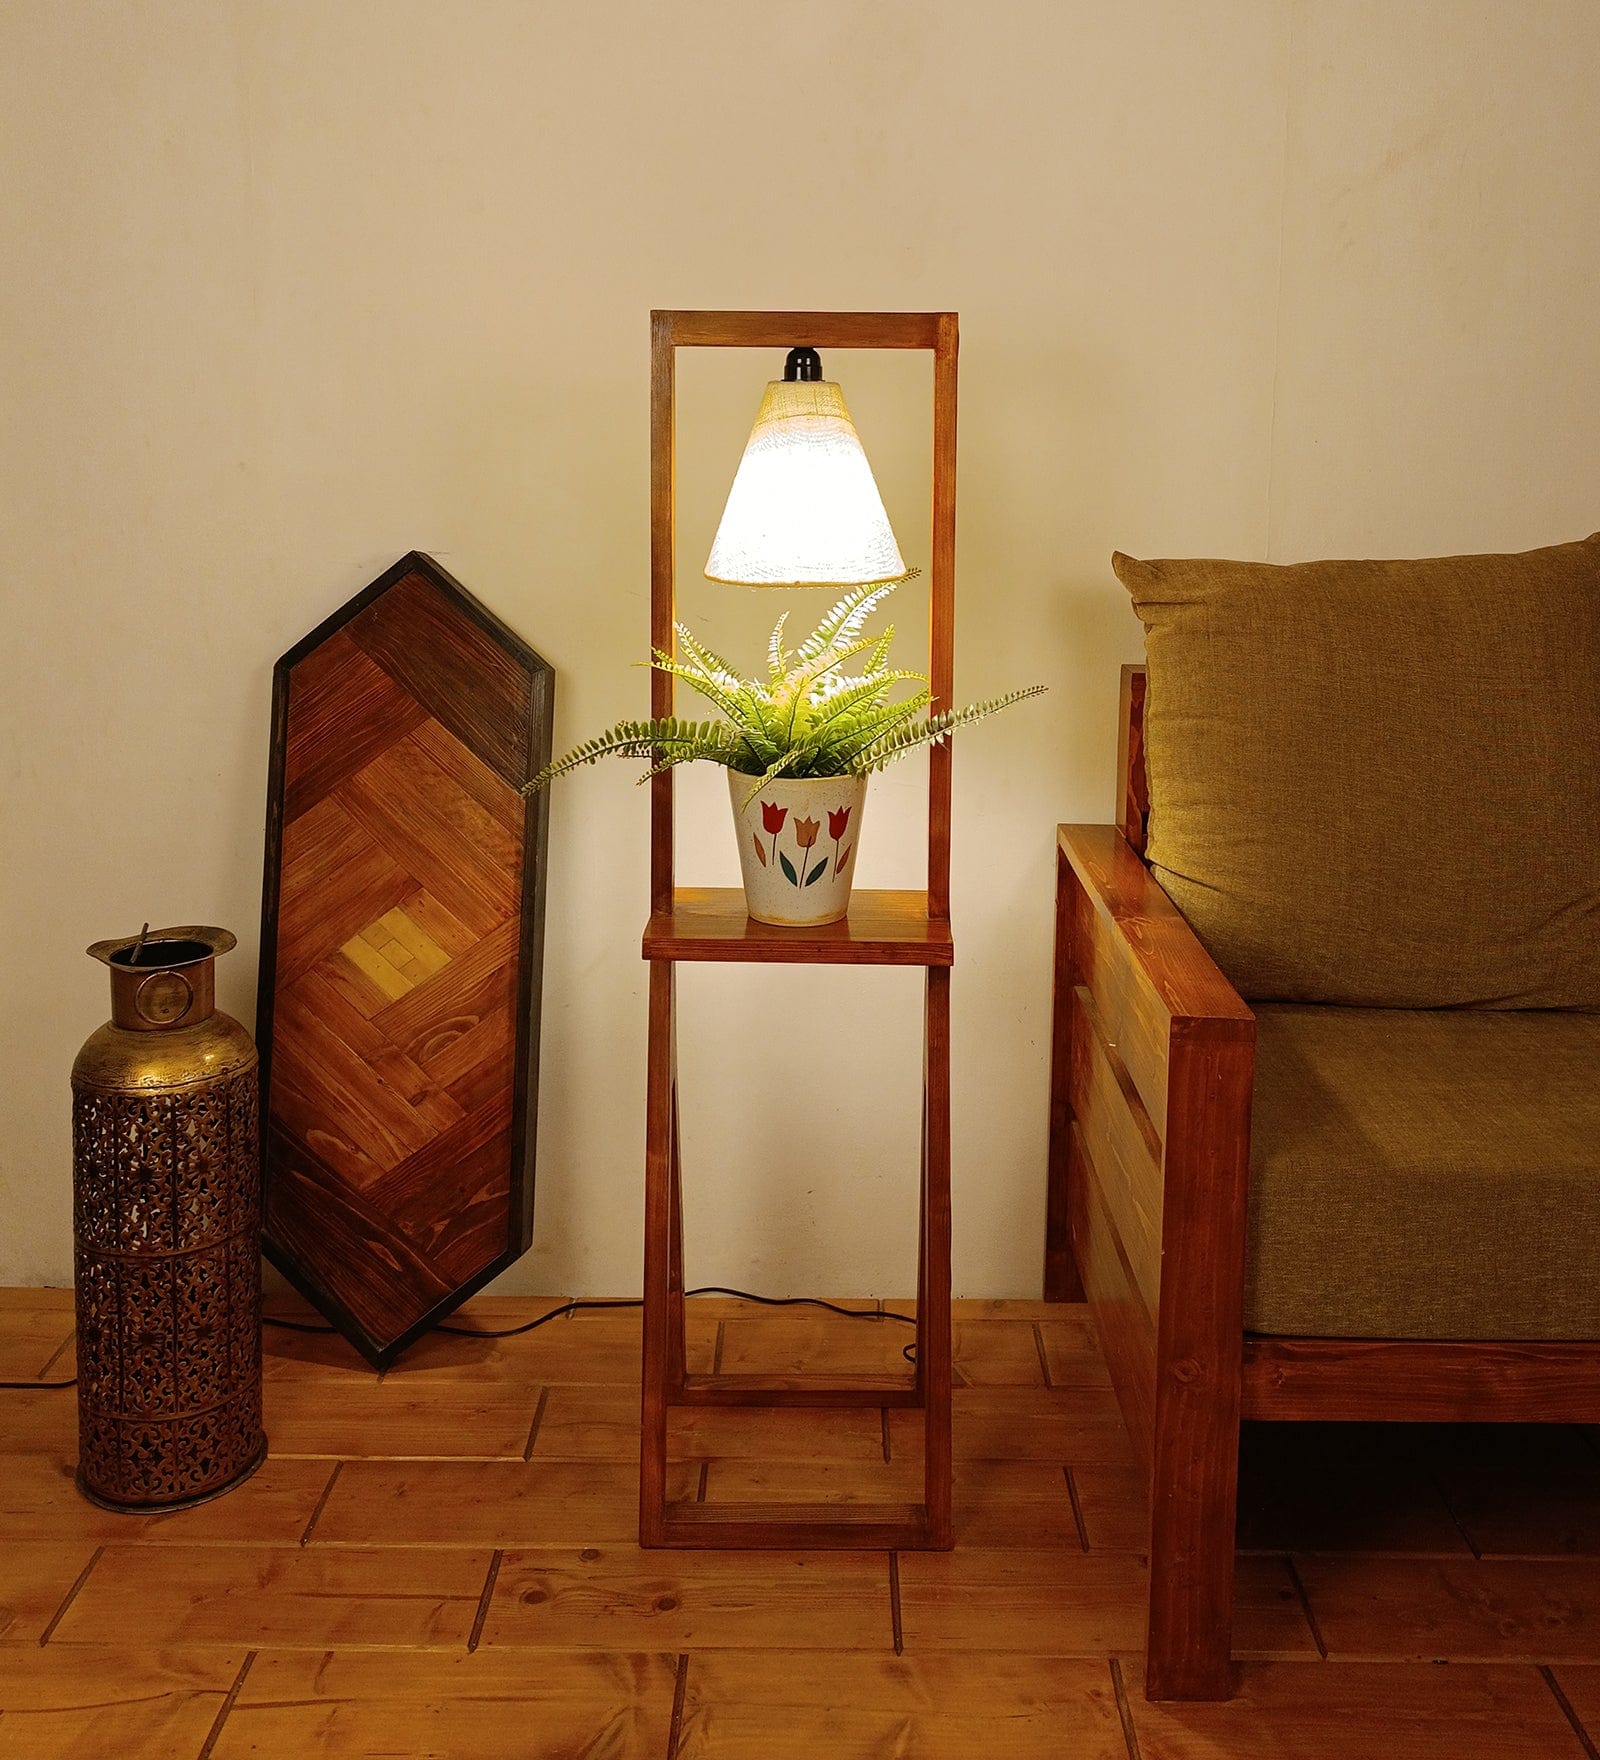 Euphoria Wooden Floor Lamp with Brown Base and Beige Fabric Lampshade (BULB NOT INCLUDED)